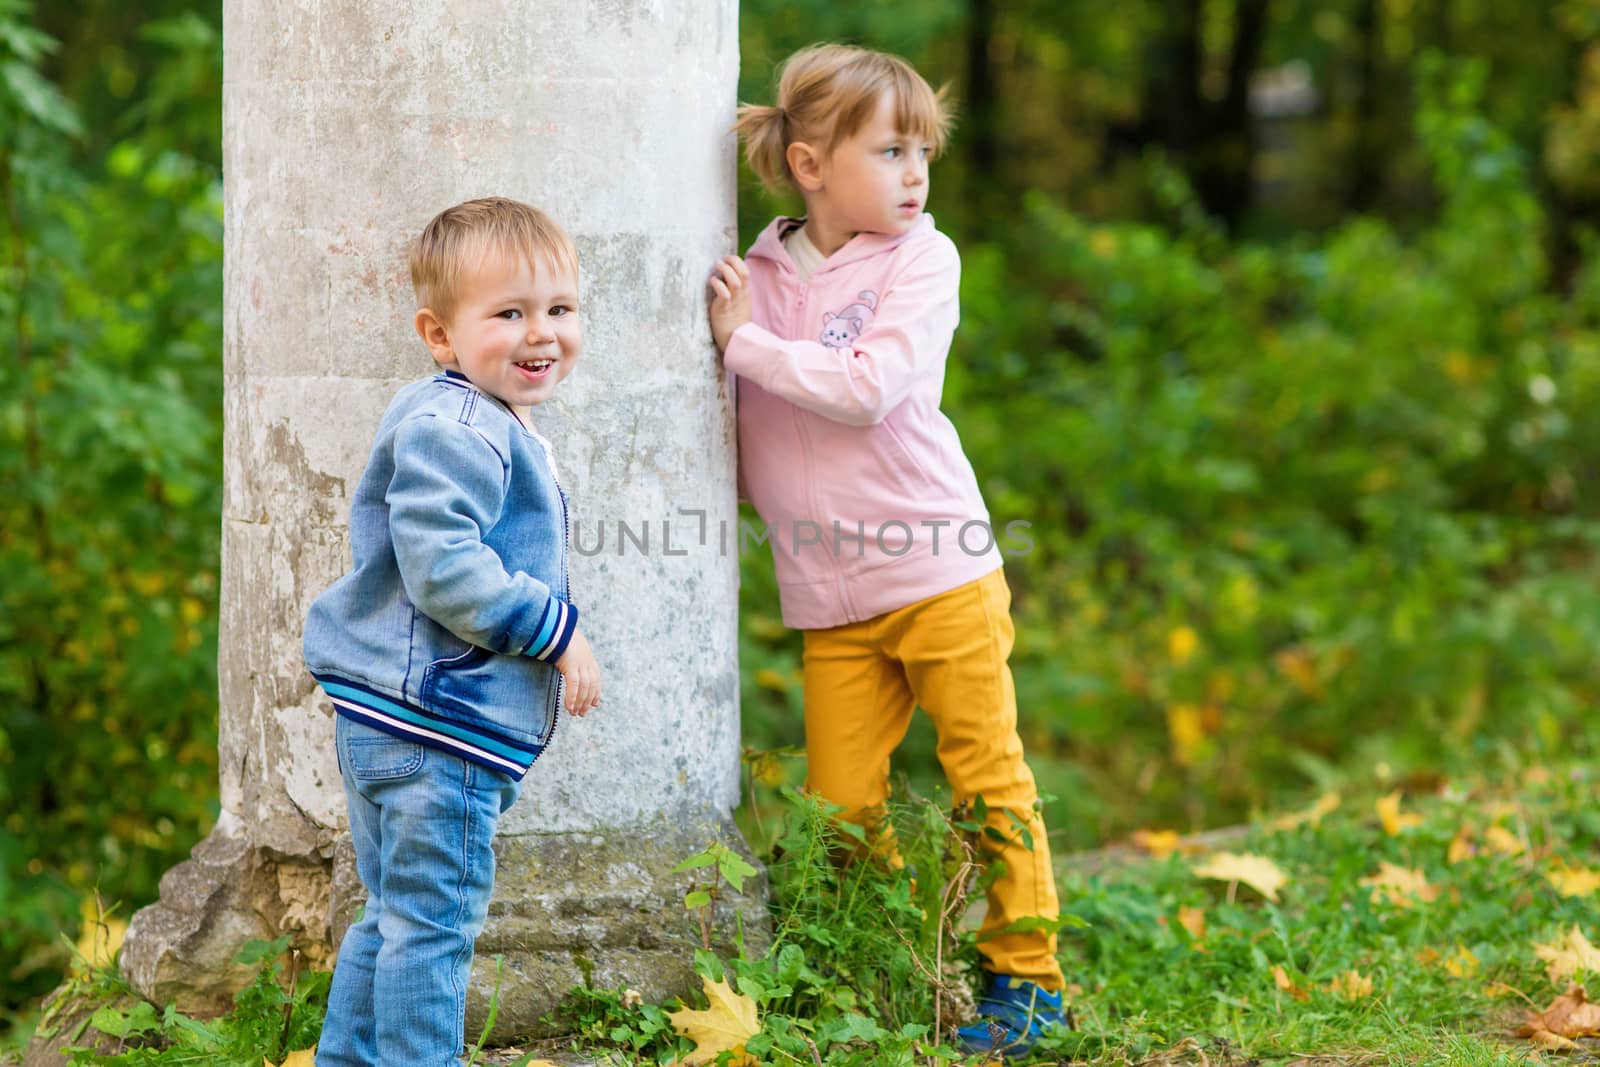 Children play near the column in the old park on an autumn walk, boy is looking at the camera smiling